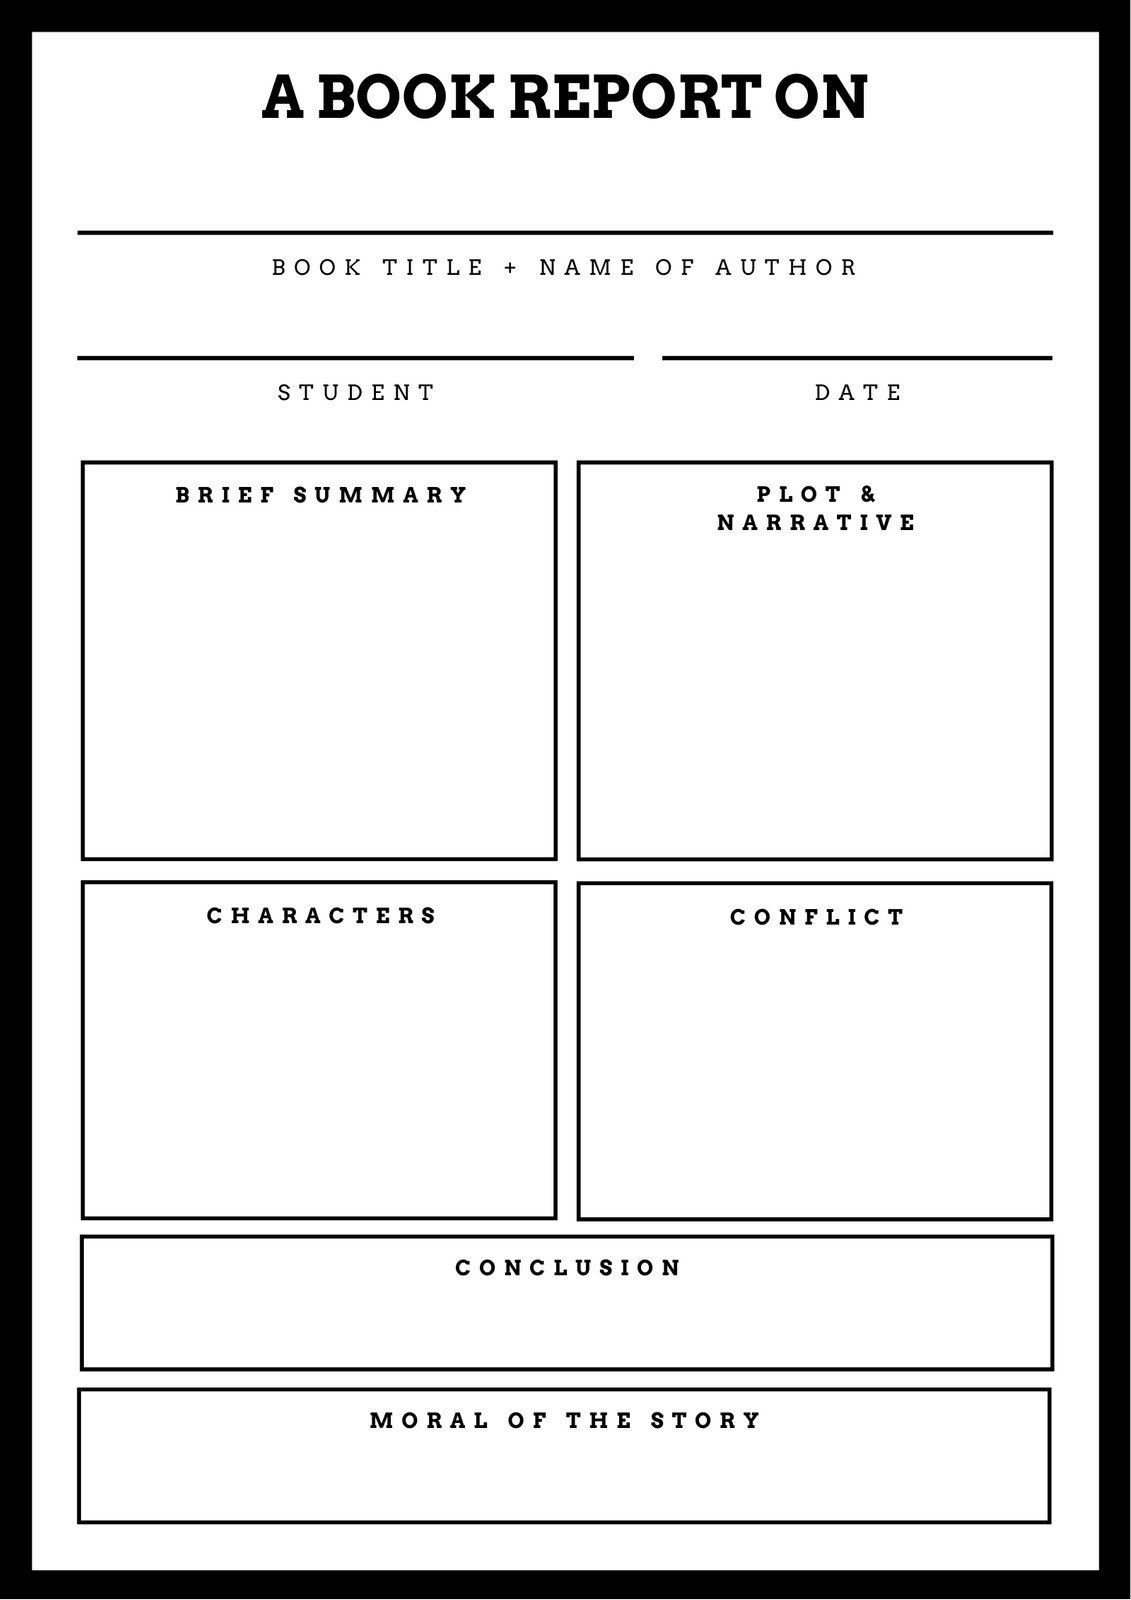 Black and White Minimalist Fiction Book Report - Templates by Canva In Nonfiction Book Report Template